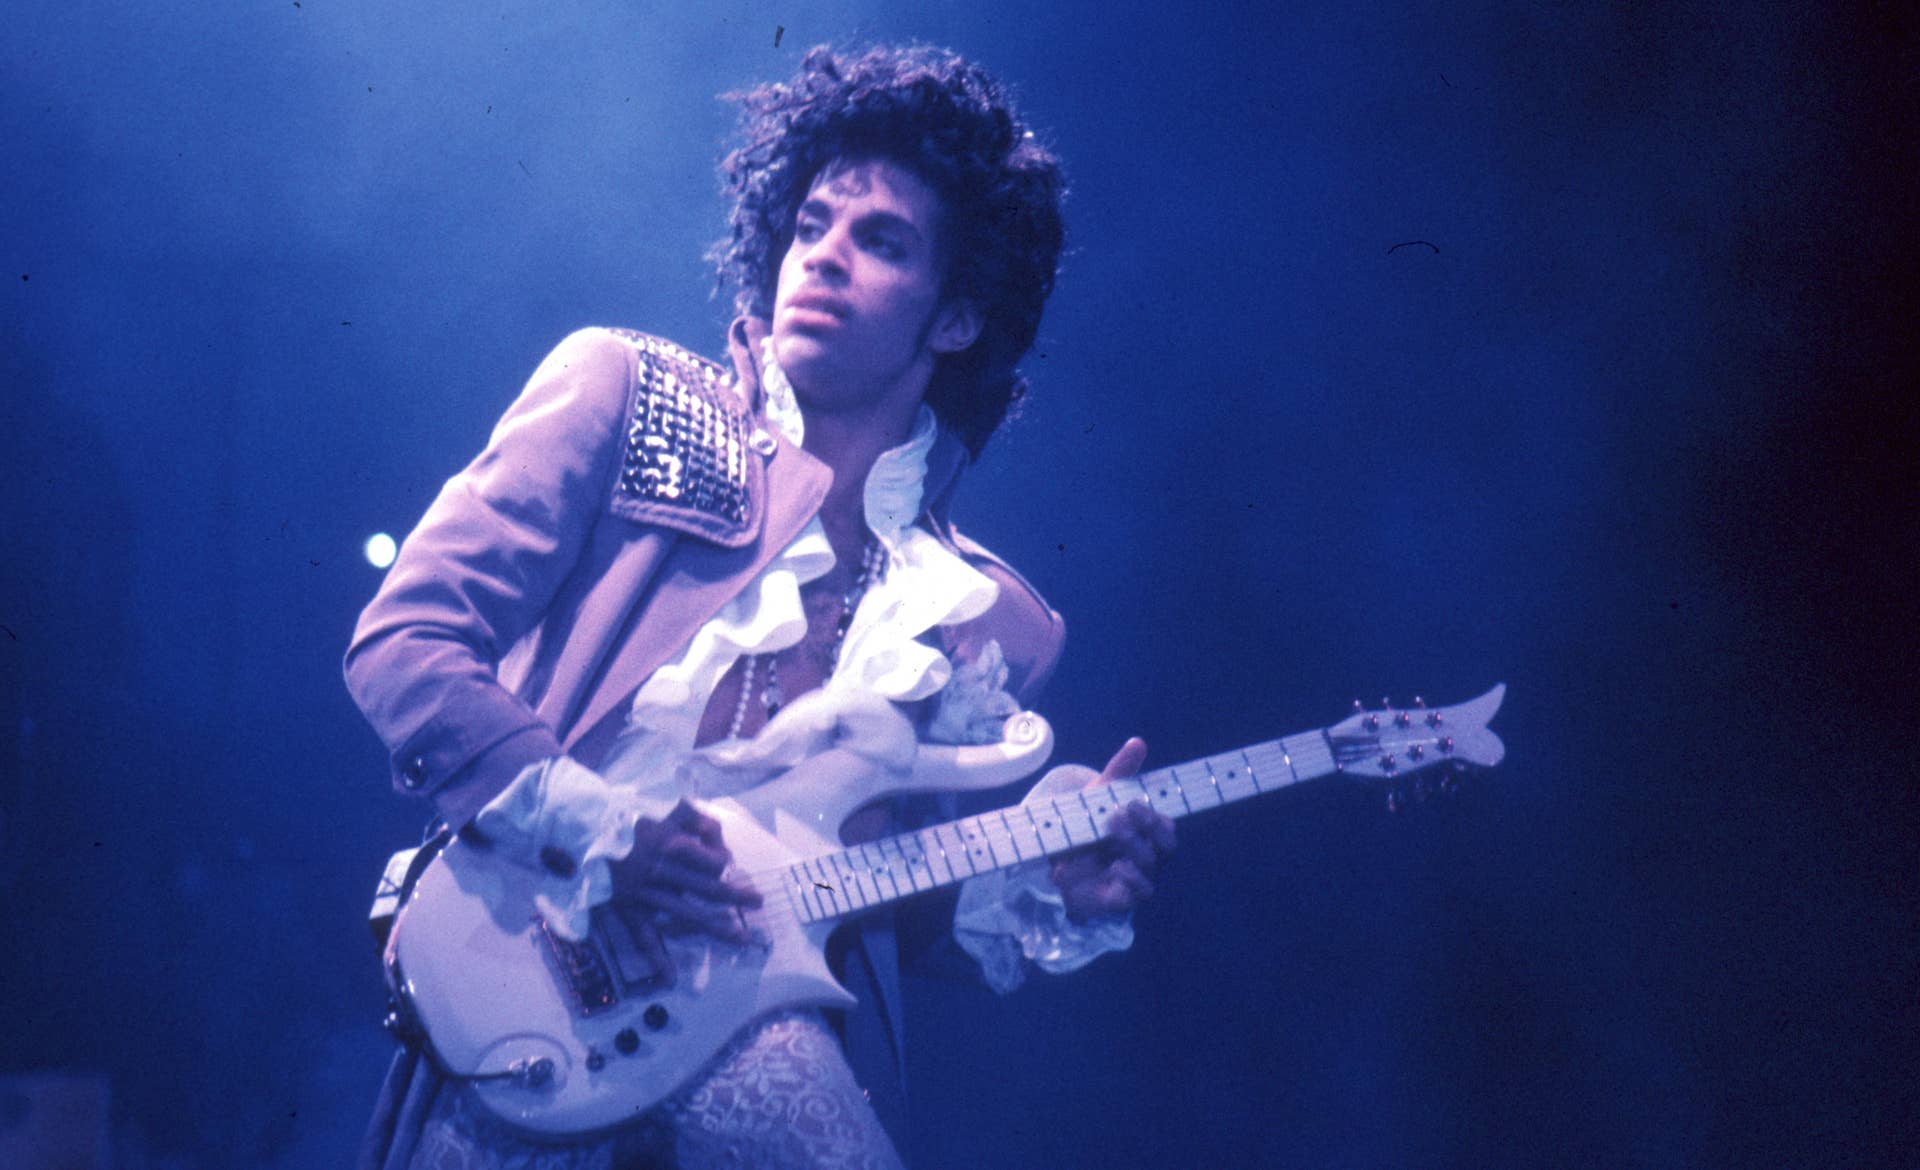 Prince performs at the Forum in Inglewood, CA, in 1986